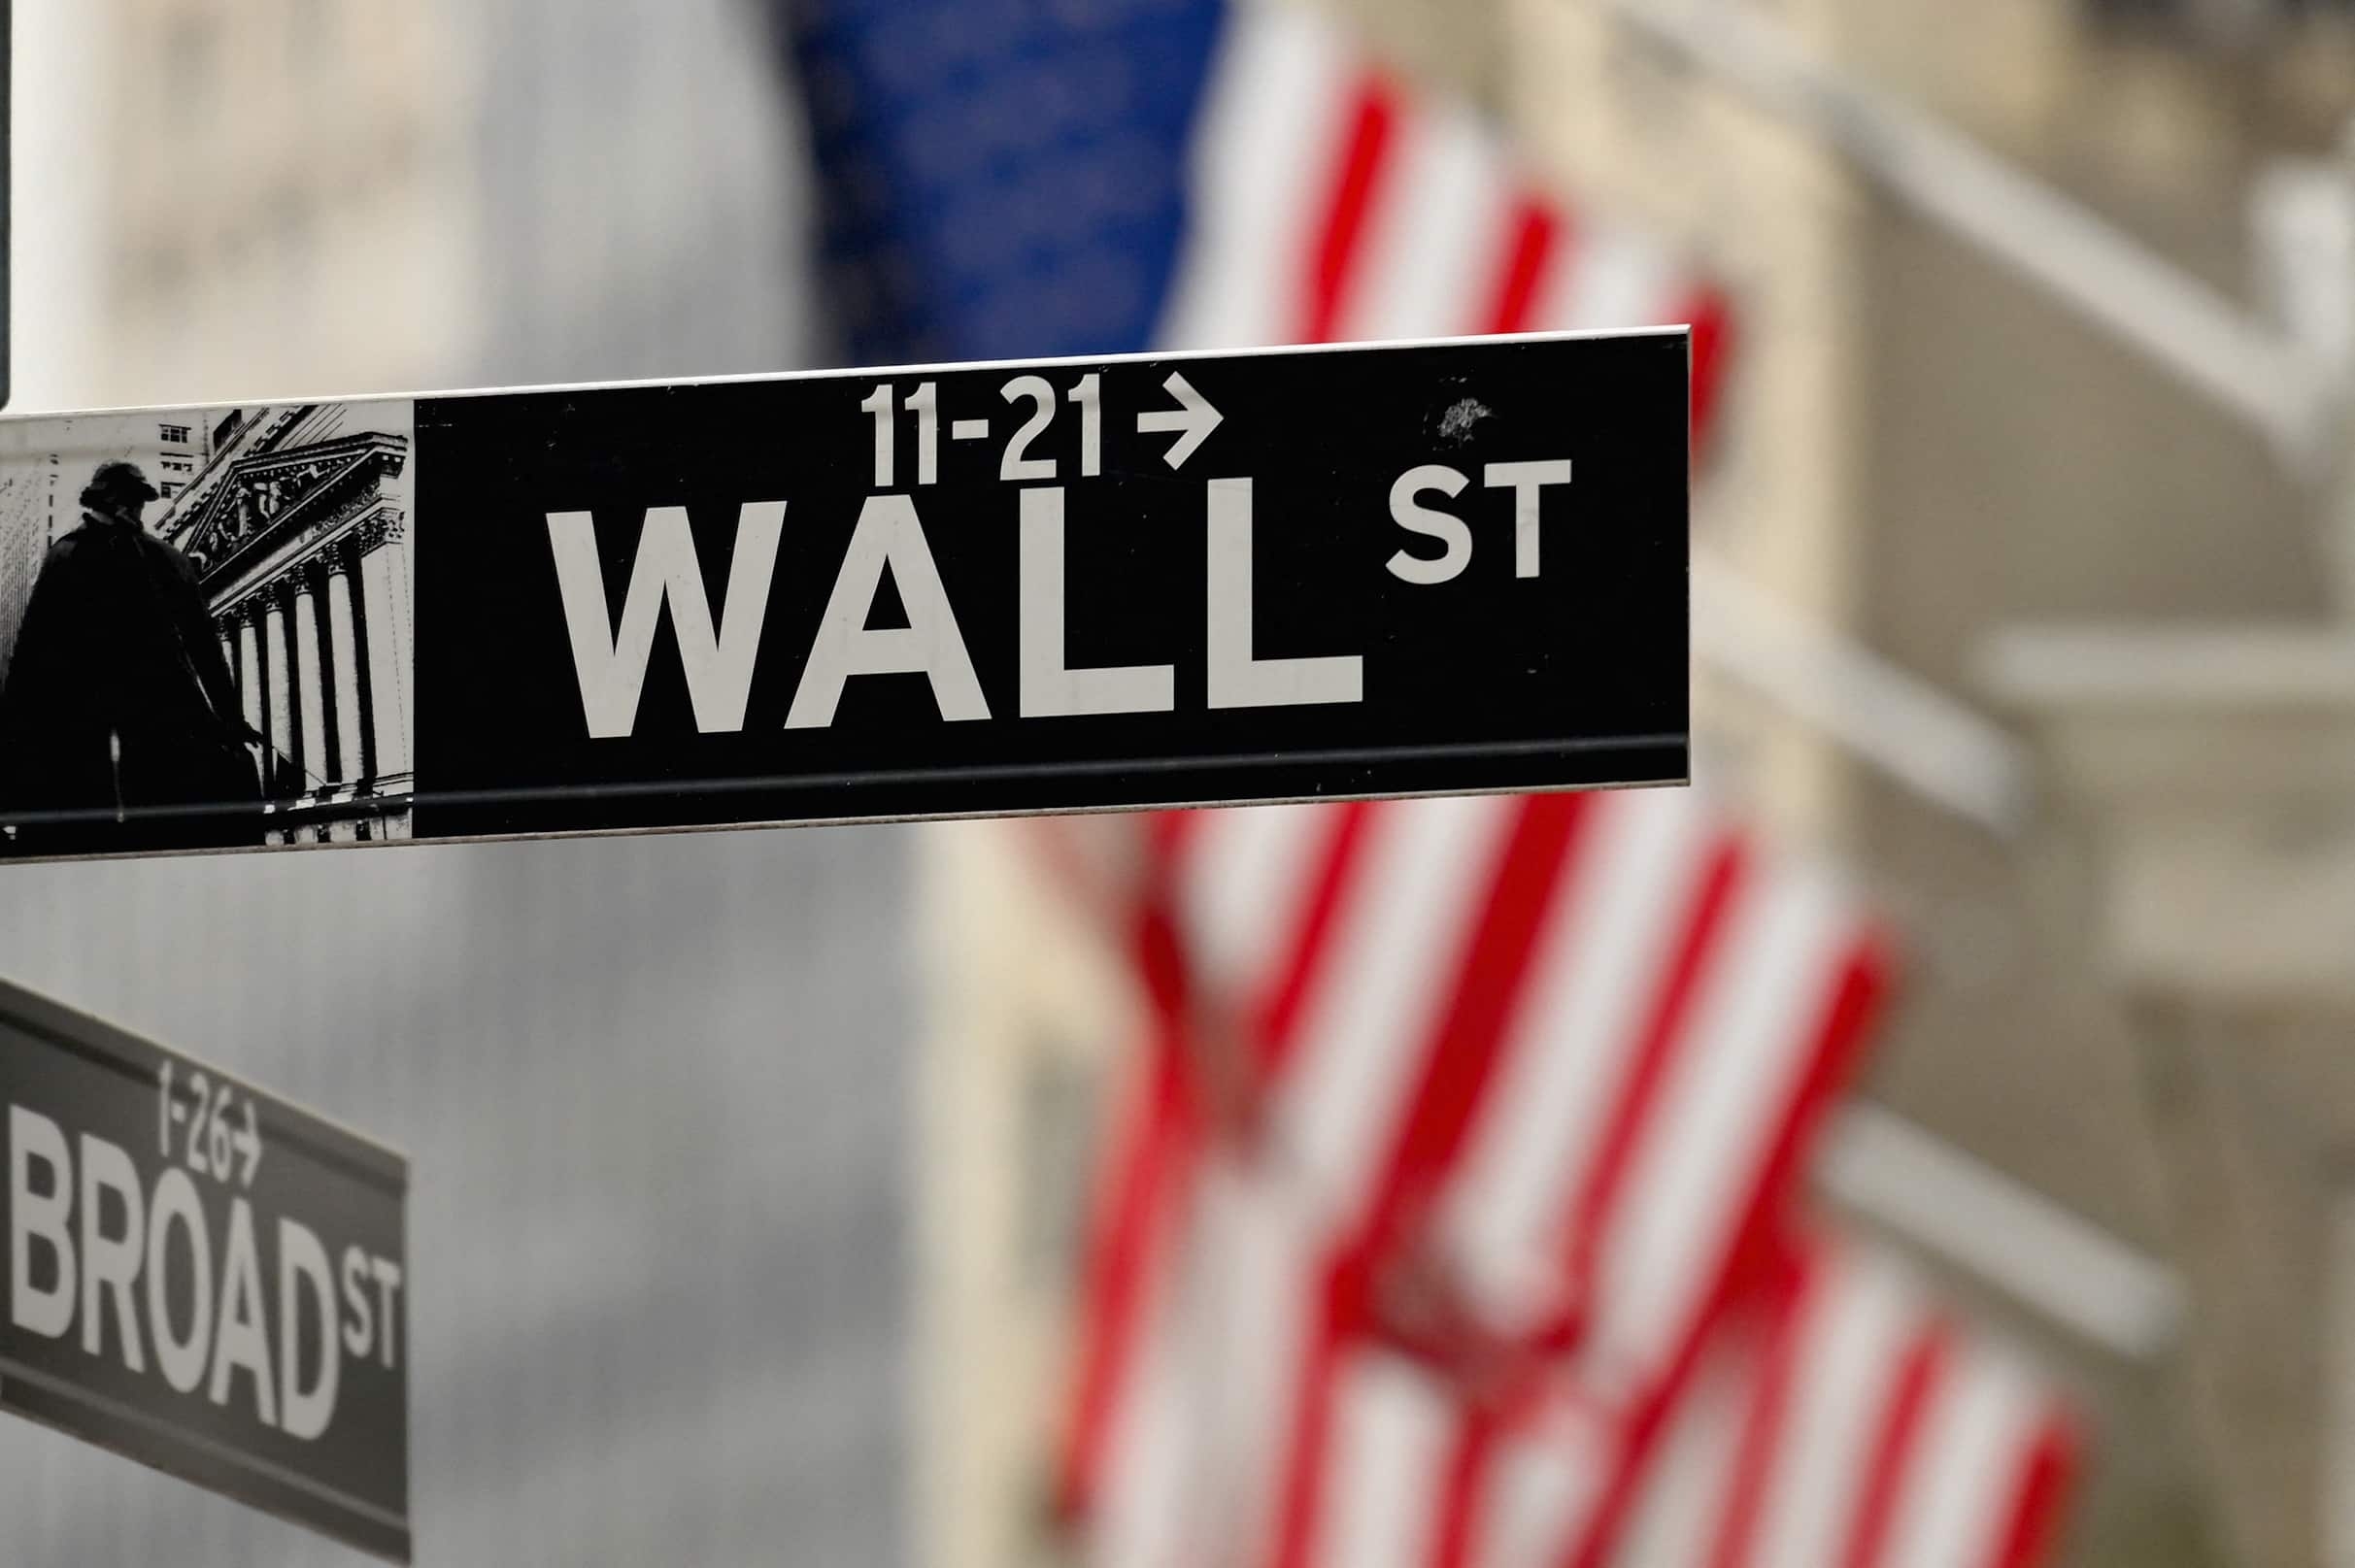 The three main Wall Street stock indexes rallied on Tuesday, a day before an expected interest rate hike by the US Federal Reserve, while oil prices dropped 7% on hopes of an end to the conflict in Ukraine. The Dow Jones Industrial Average rose 1.82% to 33,544.34, the S&amp;P 500 gained 2.14% to 4,262.45 and the Nasdaq Composite added 2.92% to 12,948.62.